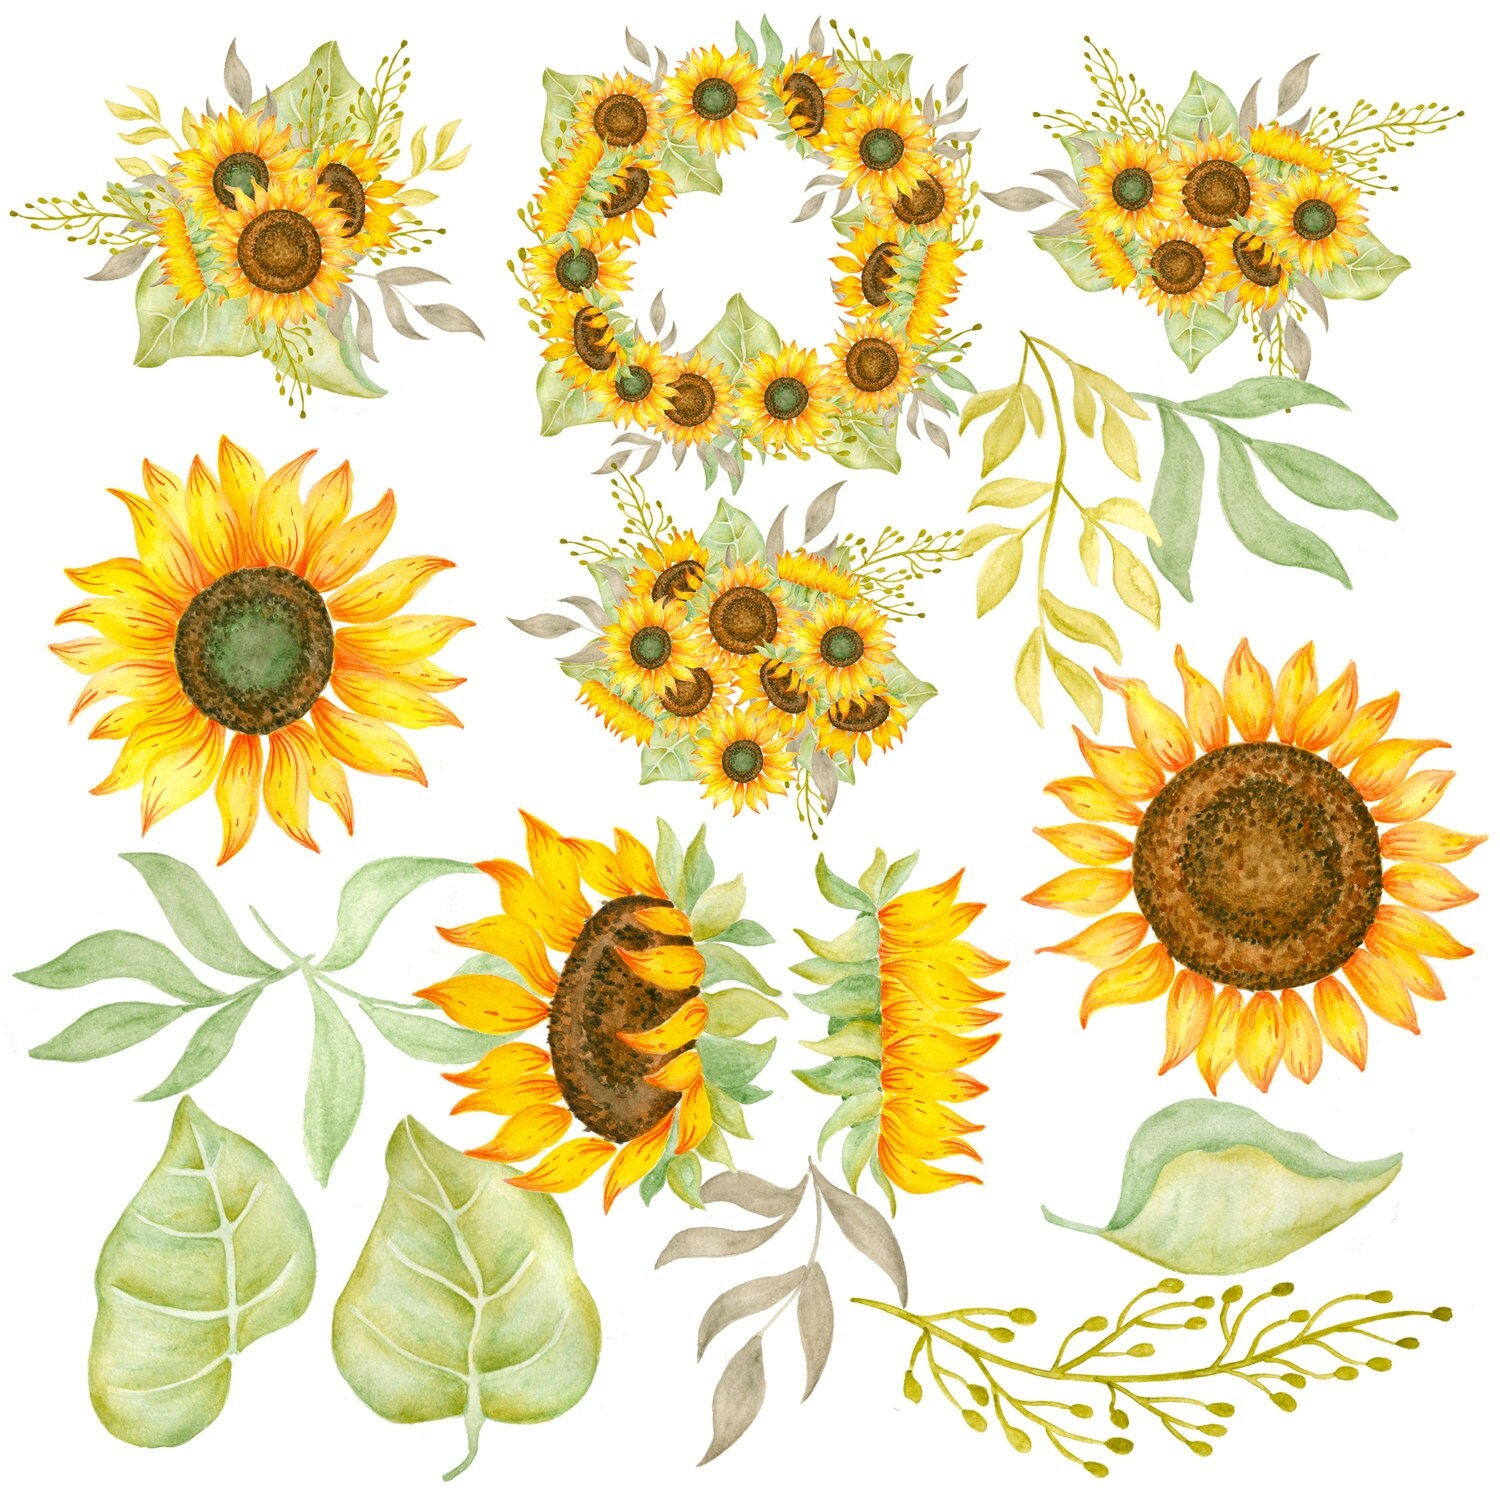 Download Sunflower clipart Watercolor sunflowers clipart Hand ...